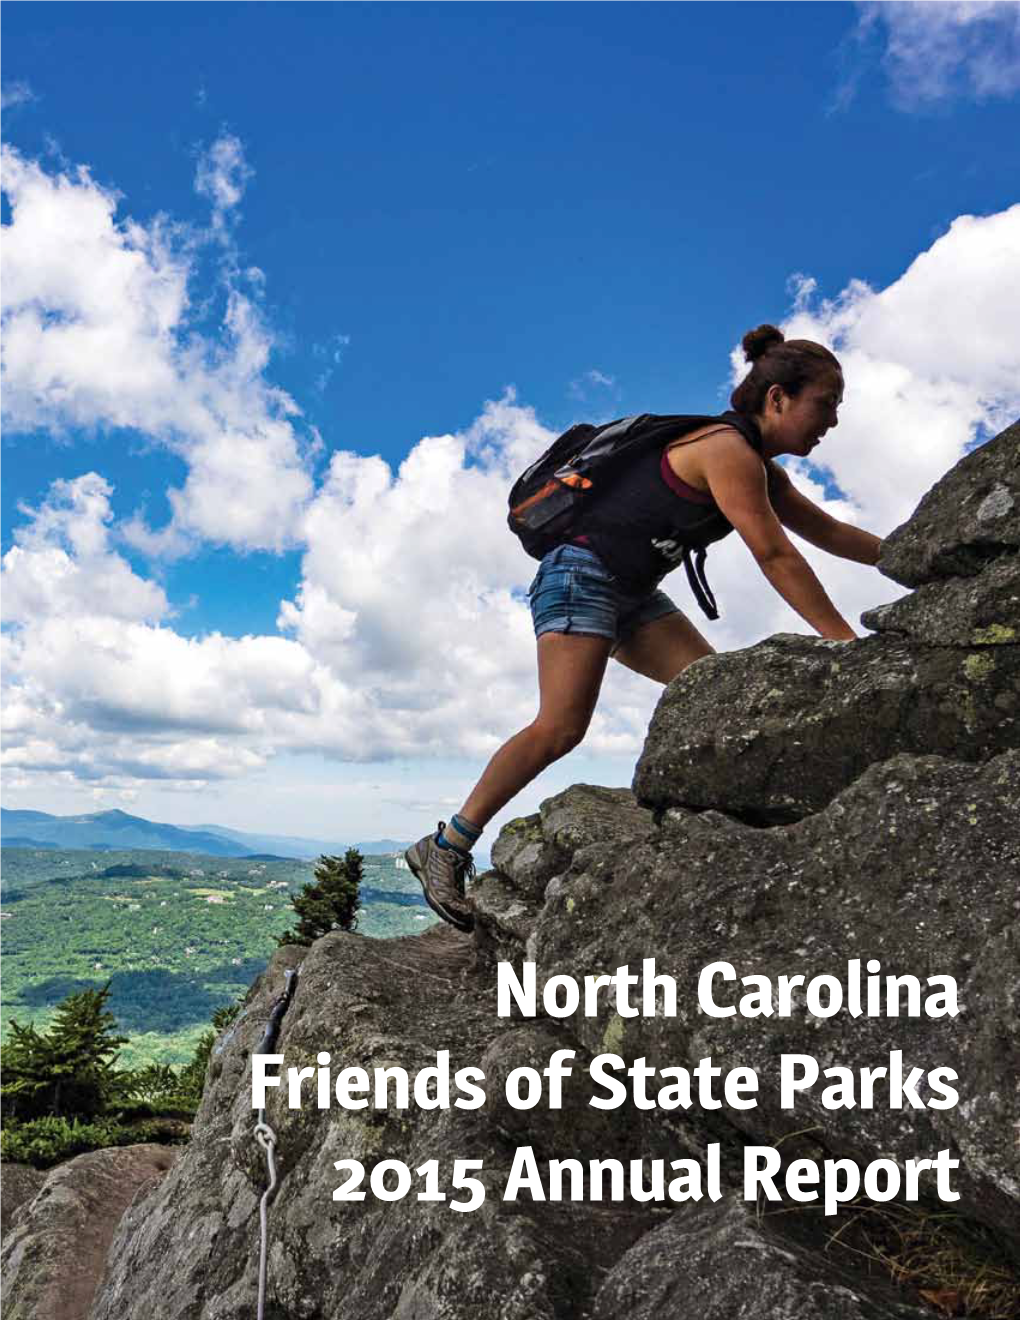 North Carolina Friends of State Parks 2015 Annual Report